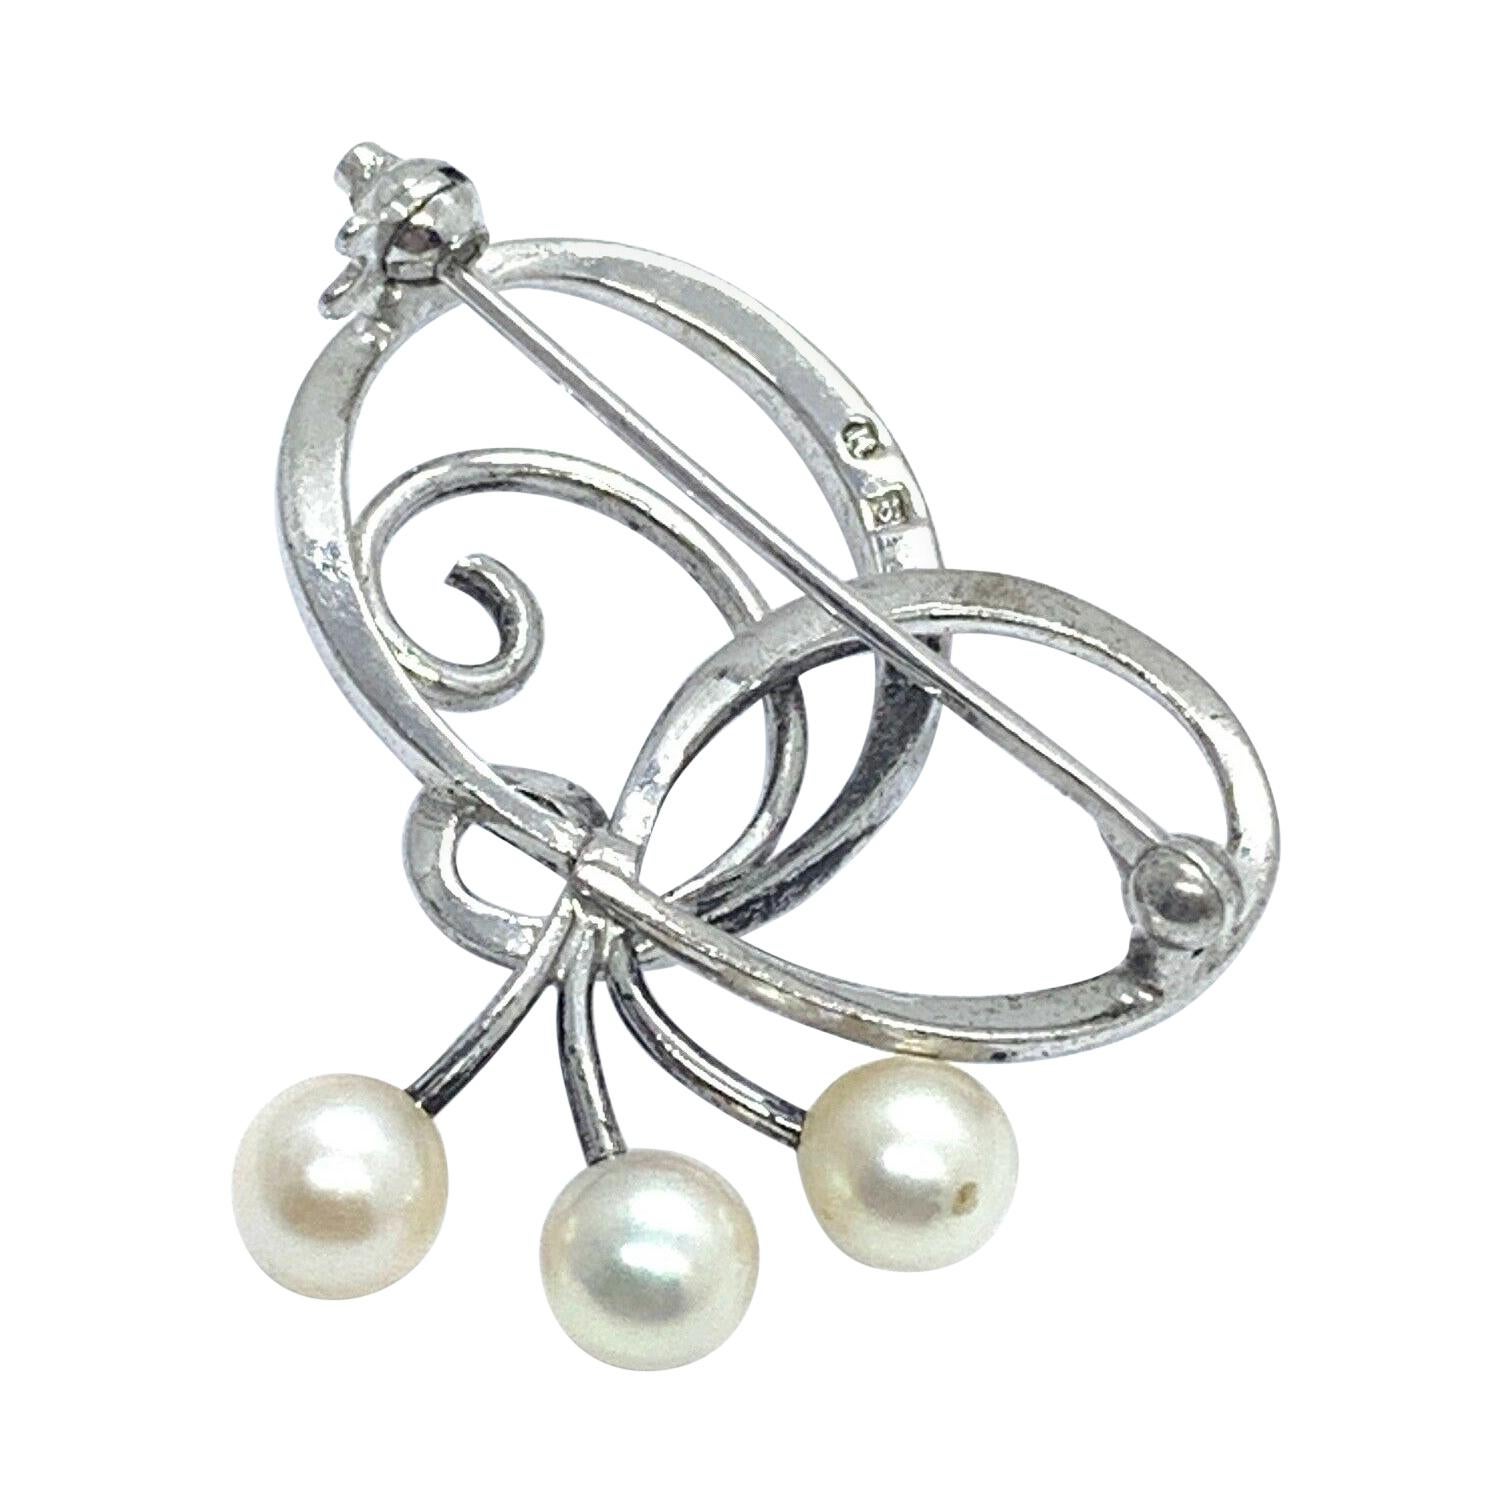 Fine Quality Akoya Pearl Mikimoto Estate Brooch Pin Sterling Silver M103

This is a Unique Custom Made Glamorous Piece of Jewelry!

Nothing says, “I Love you” more than Diamonds and Pearls!

TRUSTED SELLER SINCE 2002
PLEASE SEE OUR HUNDREDS OF